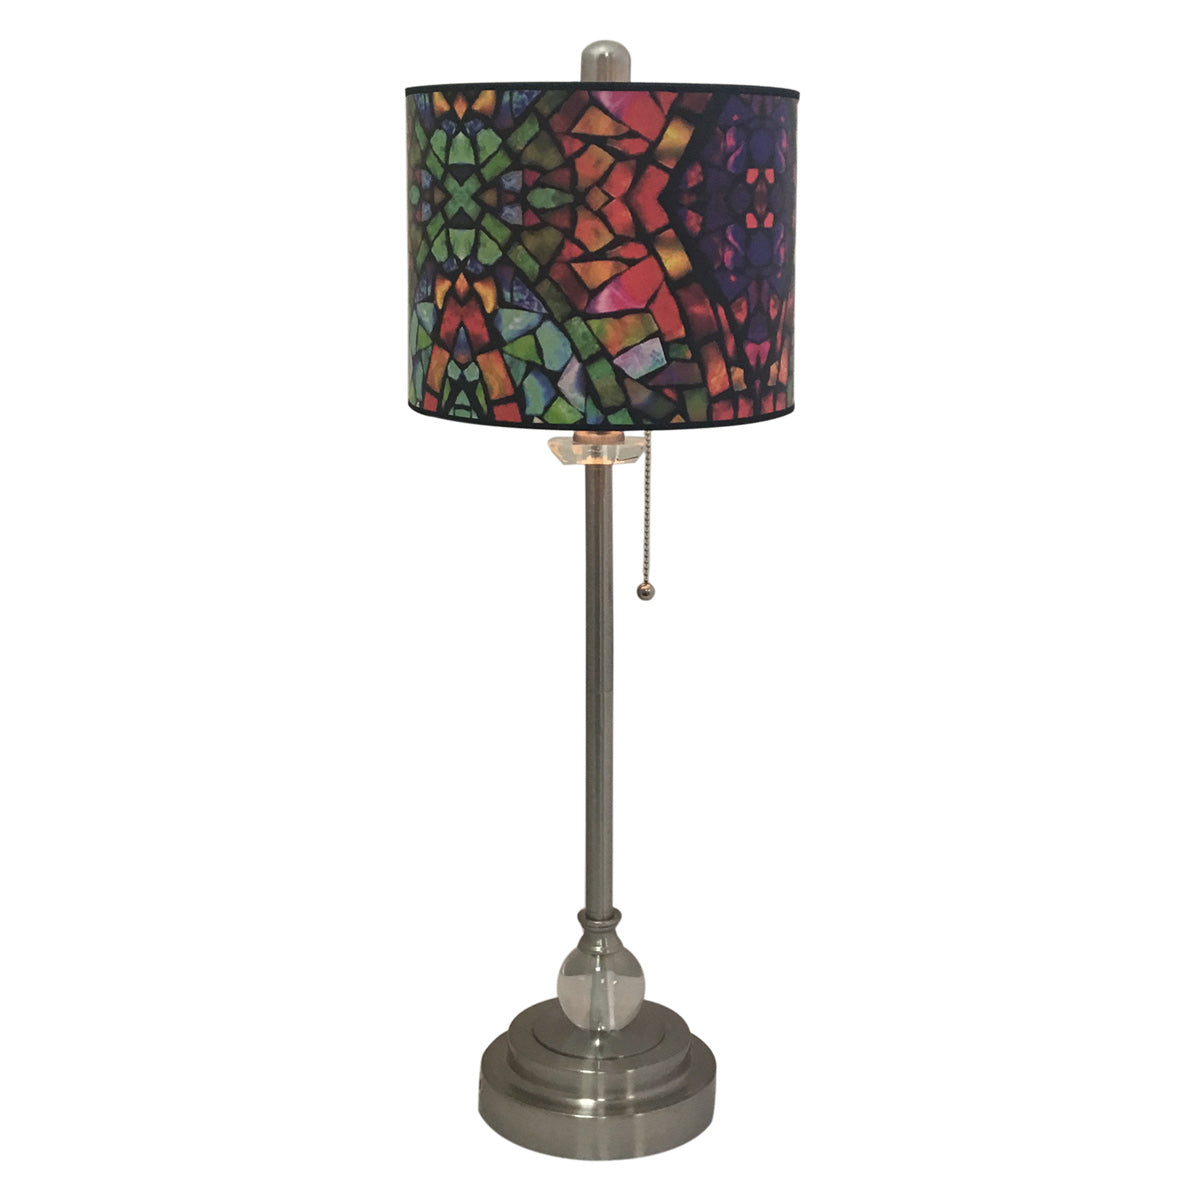 Royal Designs 28" Crystal and Brushed Nickel Buffet Lamp with Mosaic Stained Glass Design Hardback Lamp Shade, Set of 2